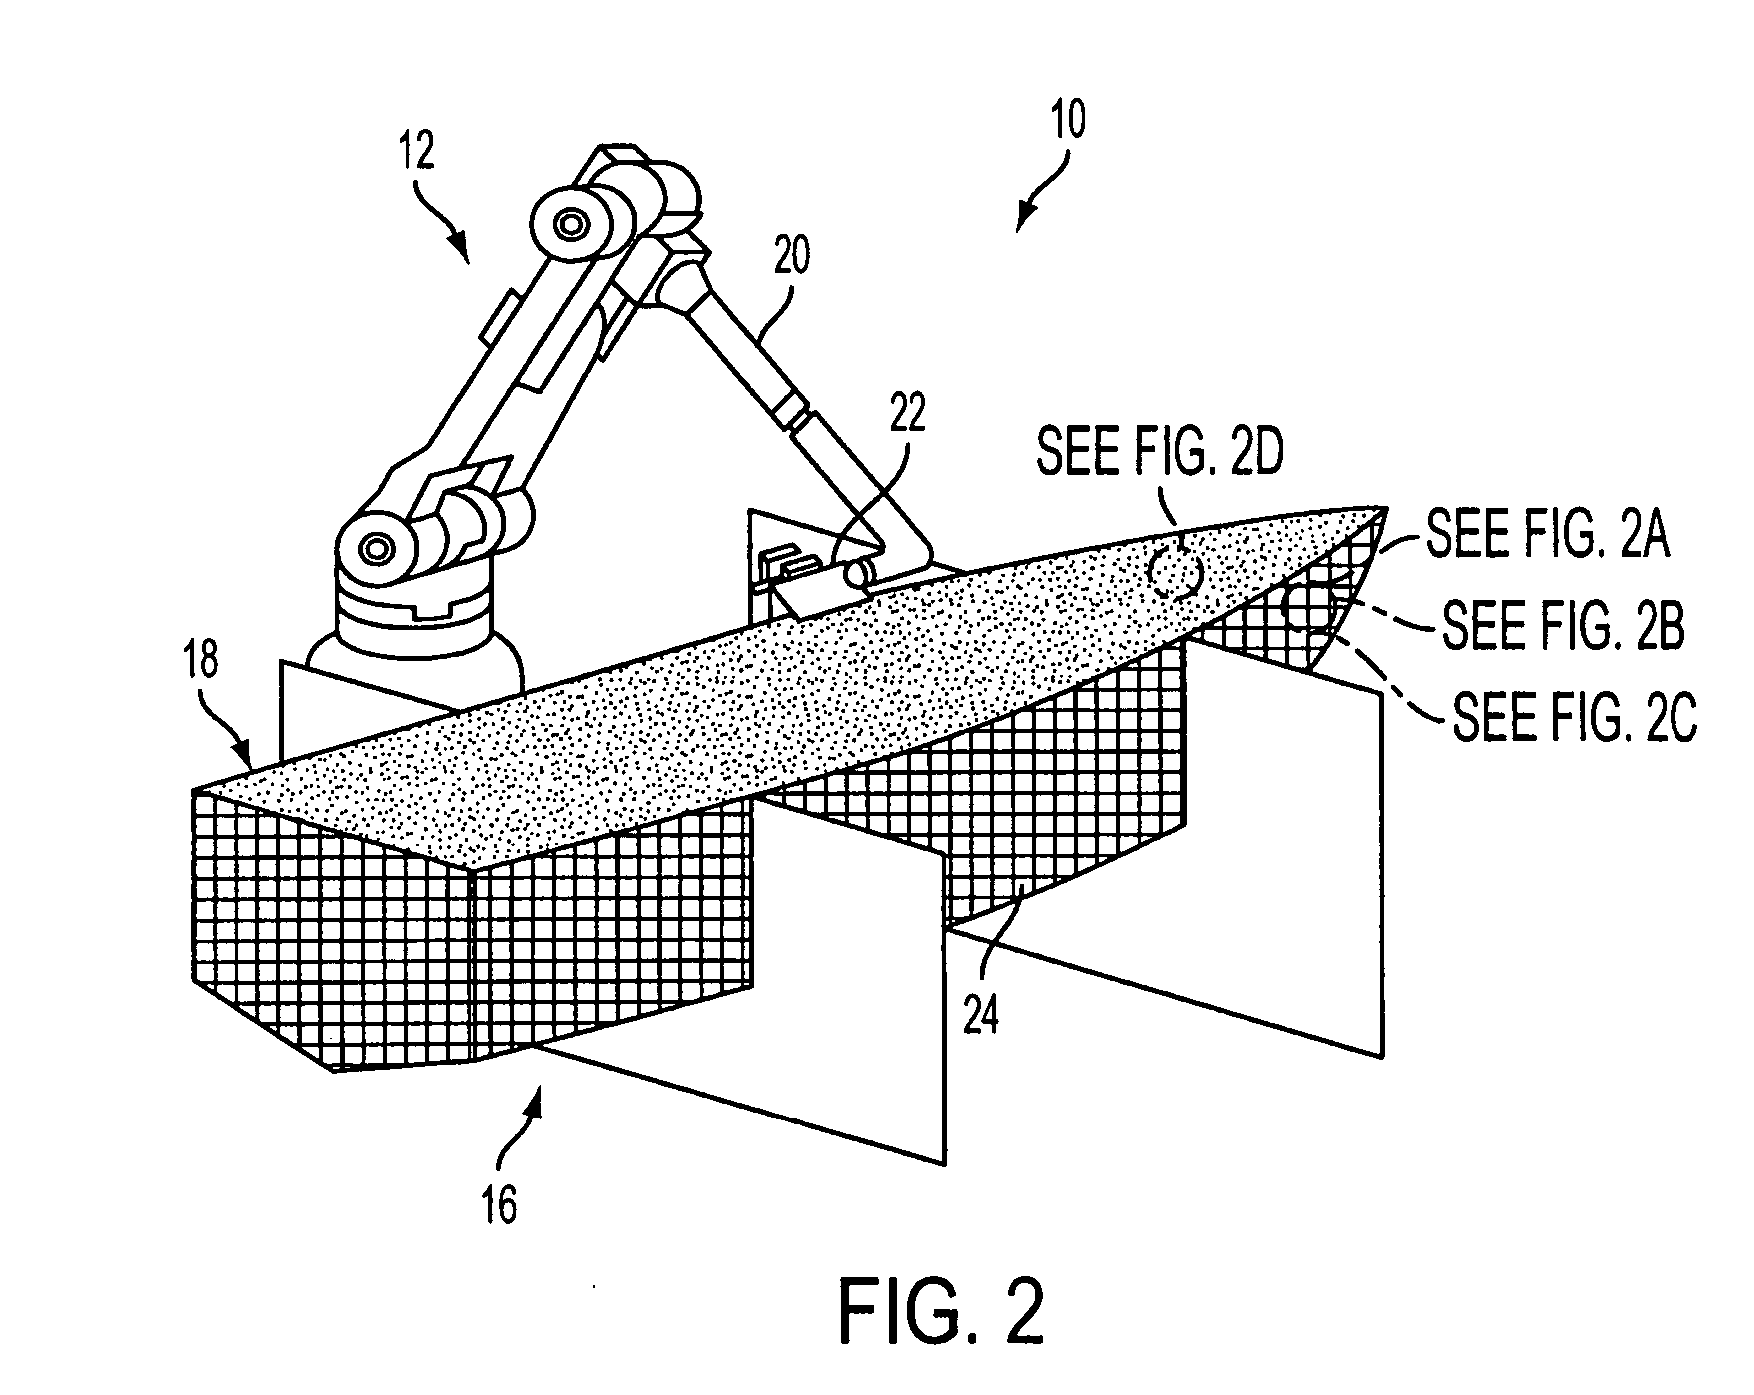 Apparatus and method for making preforms in mold